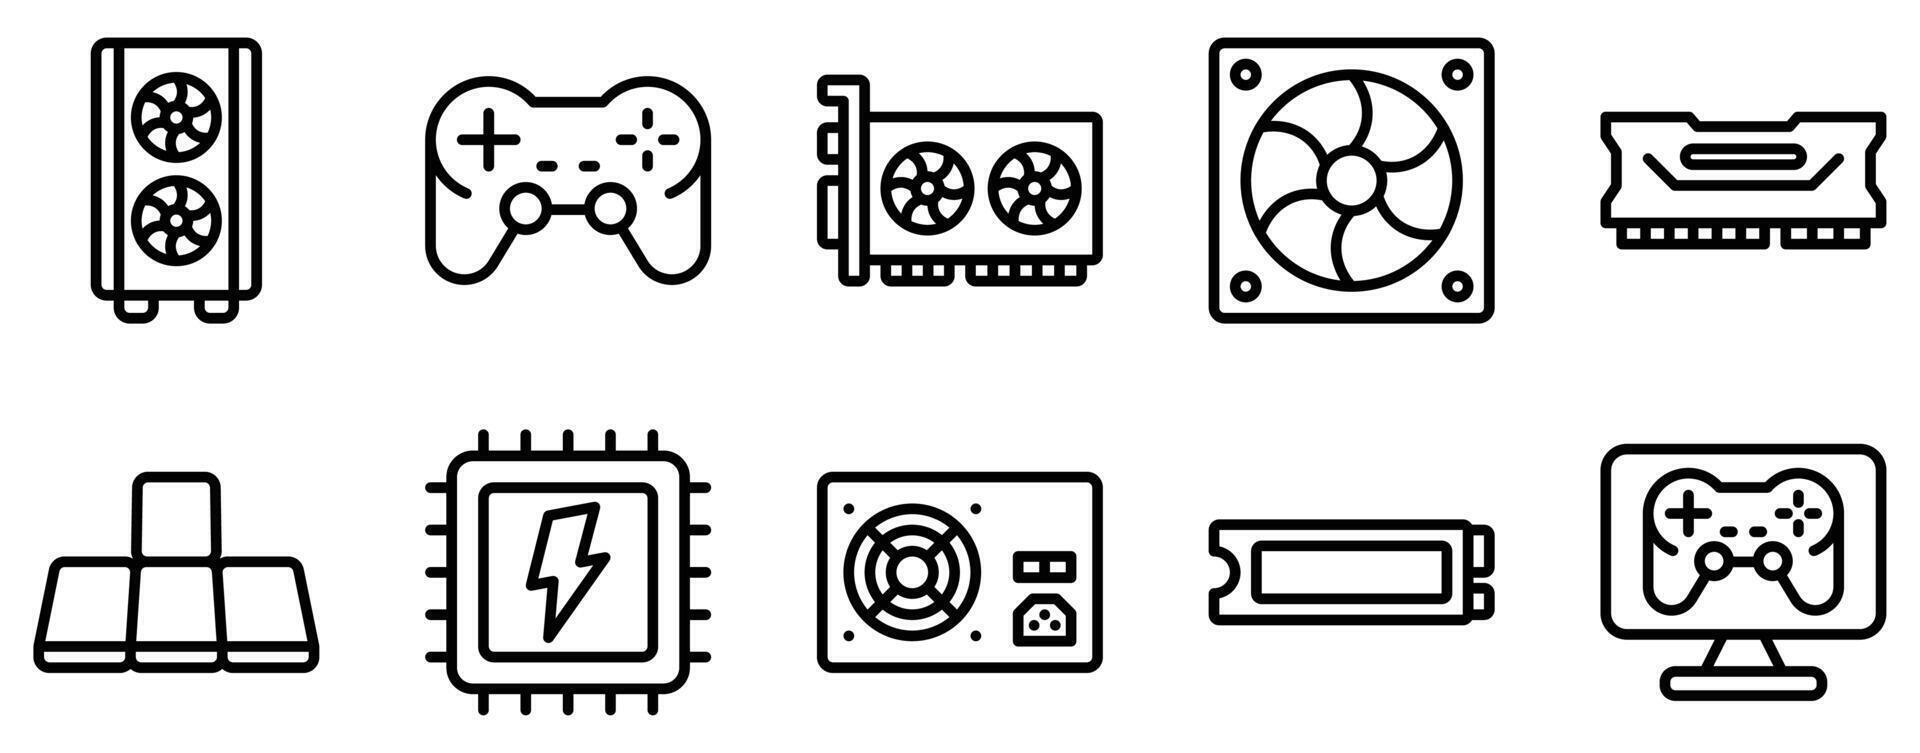 Ultimate Gaming PC Icon Set in Line Style vector